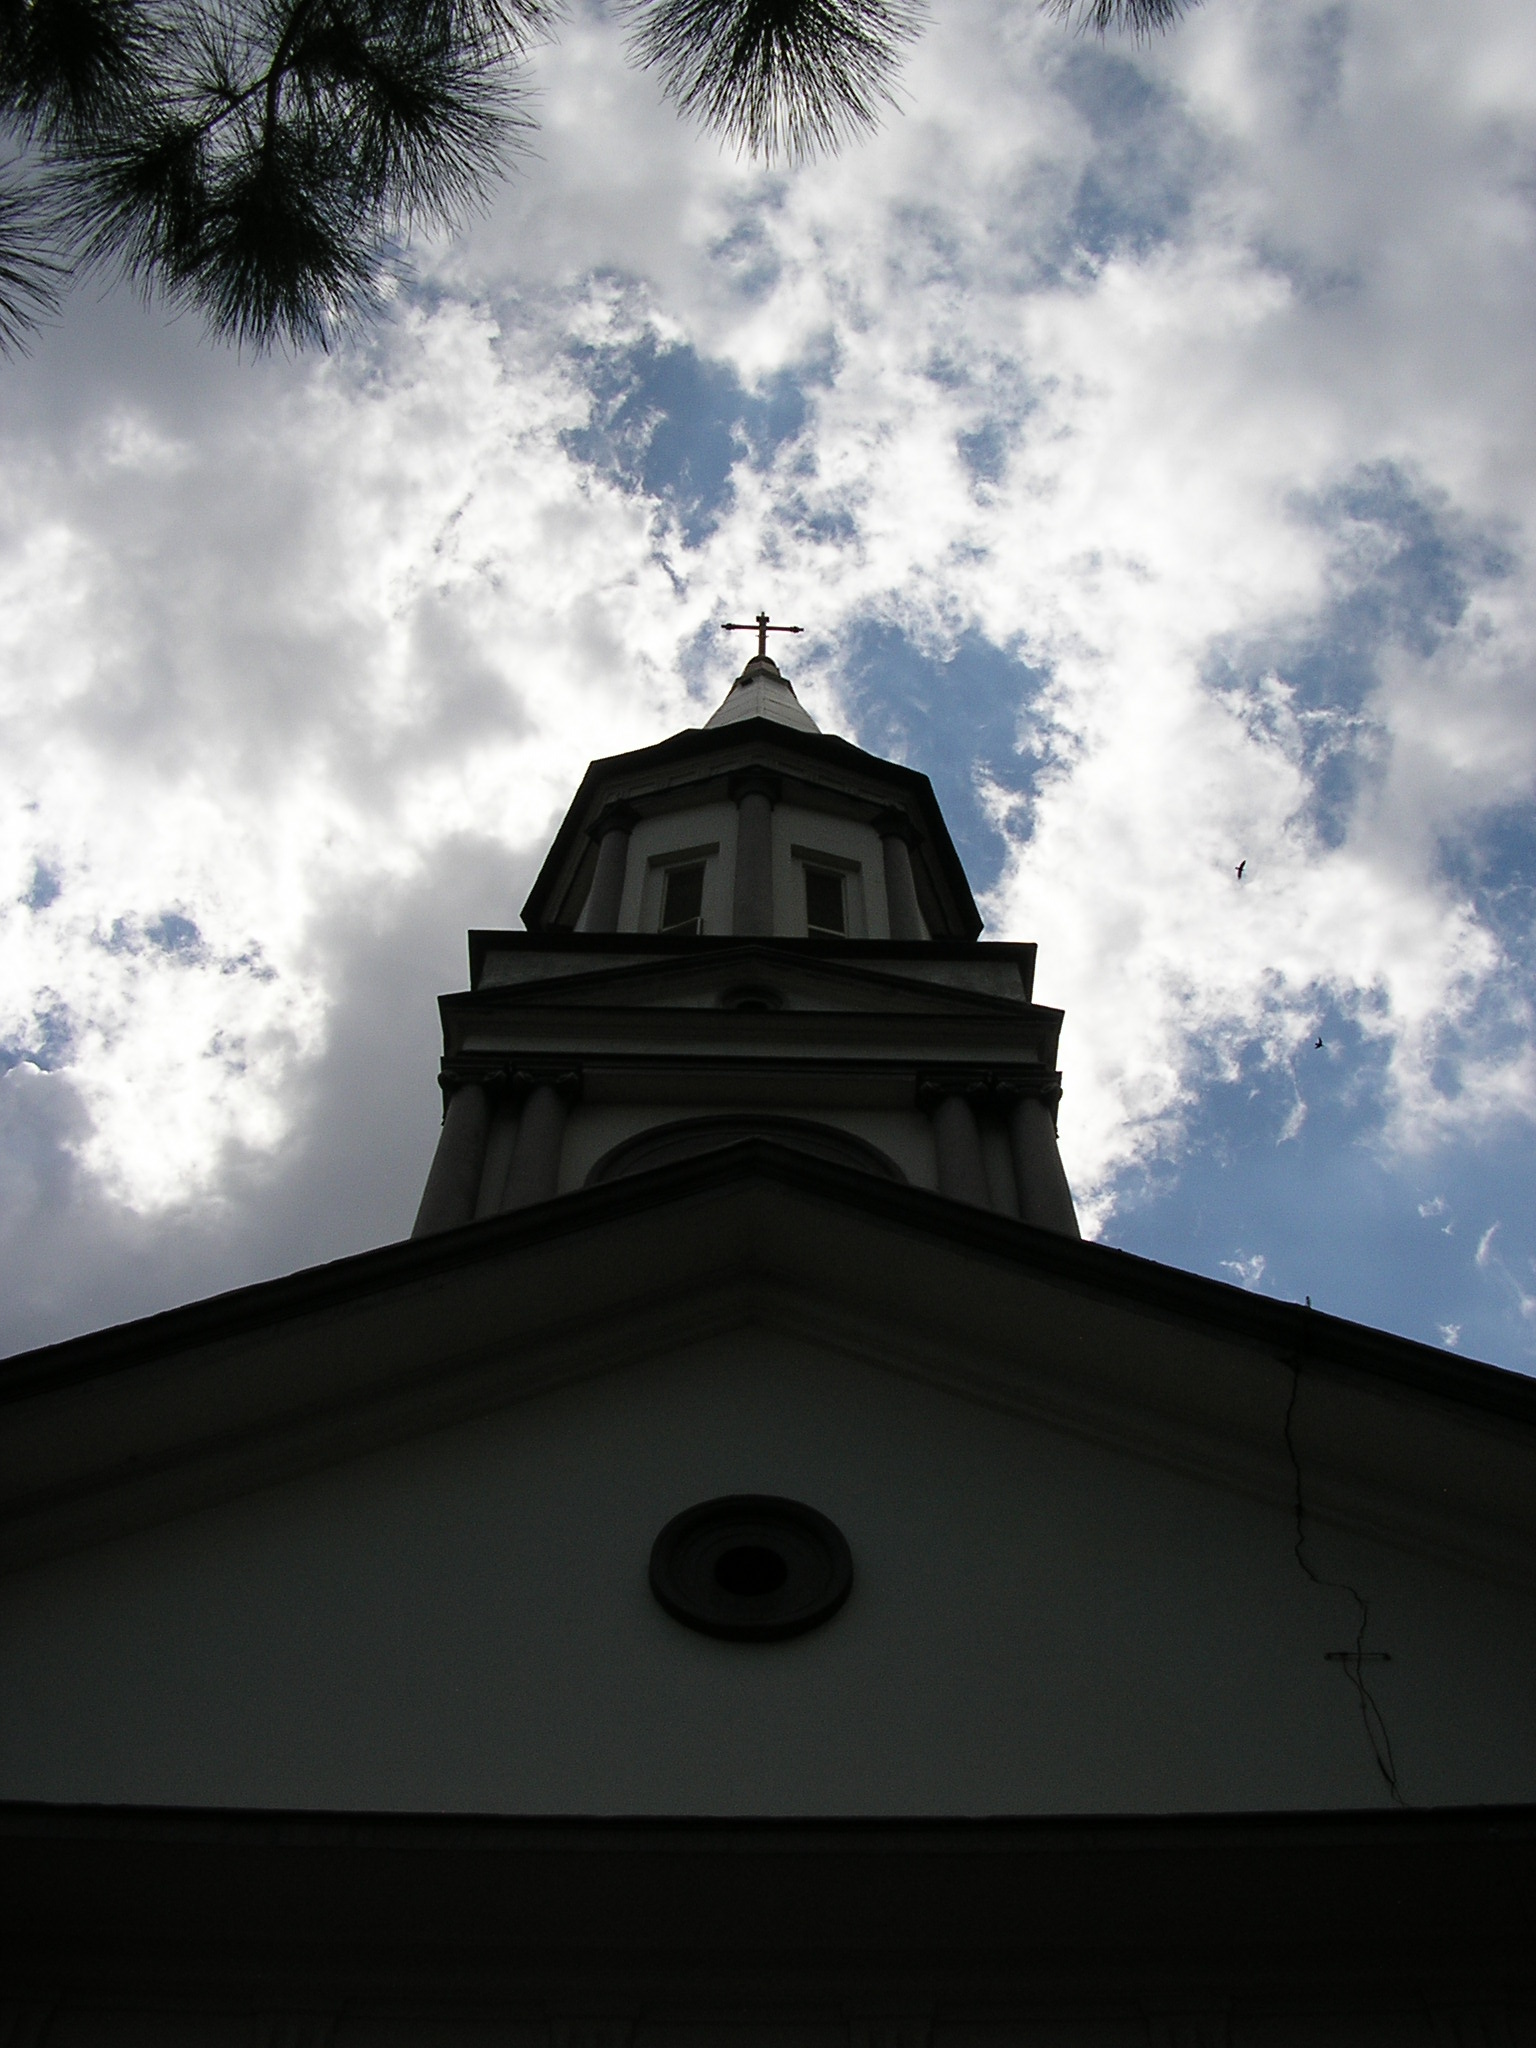 Steeple of the Cathedral of the Good Shepherd, Singapore - 20060706-01